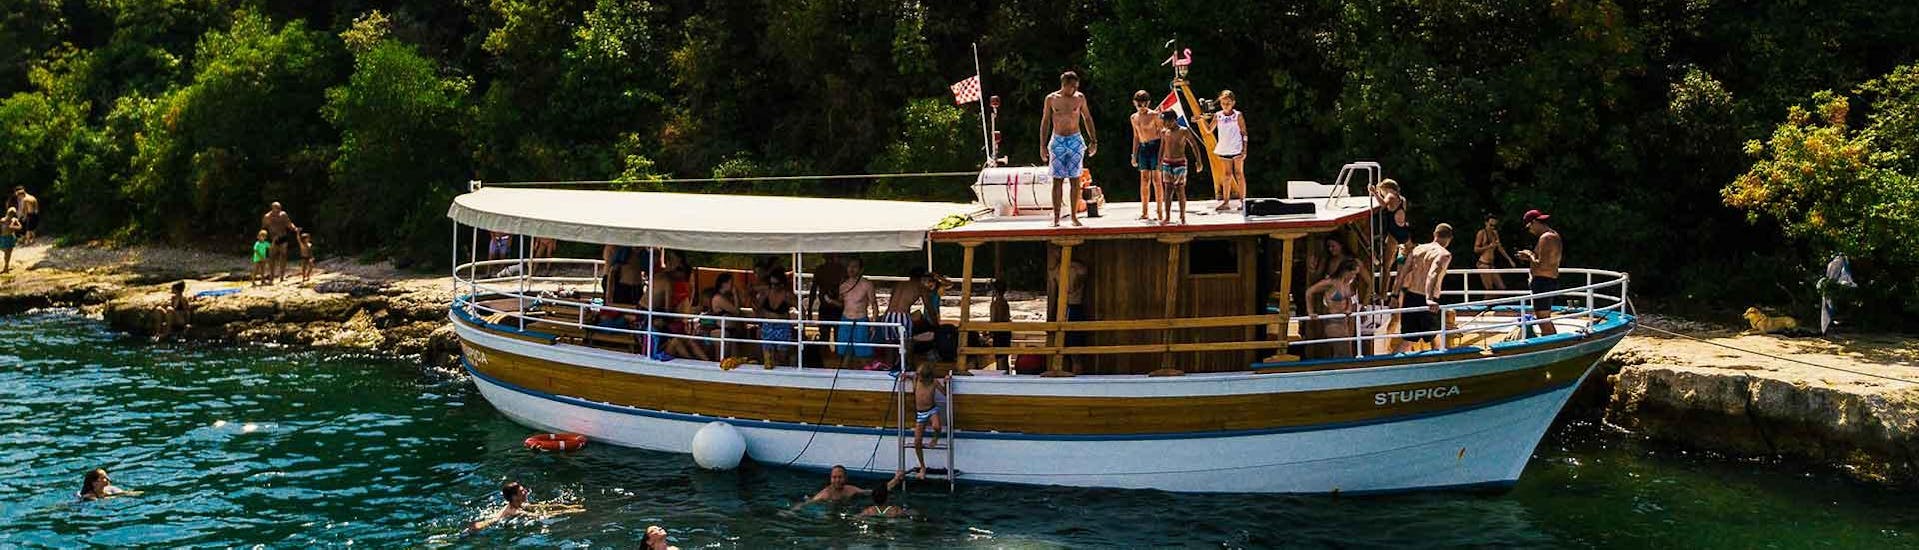 Boat trip excursions in Rovinj with Stupica Excursions.